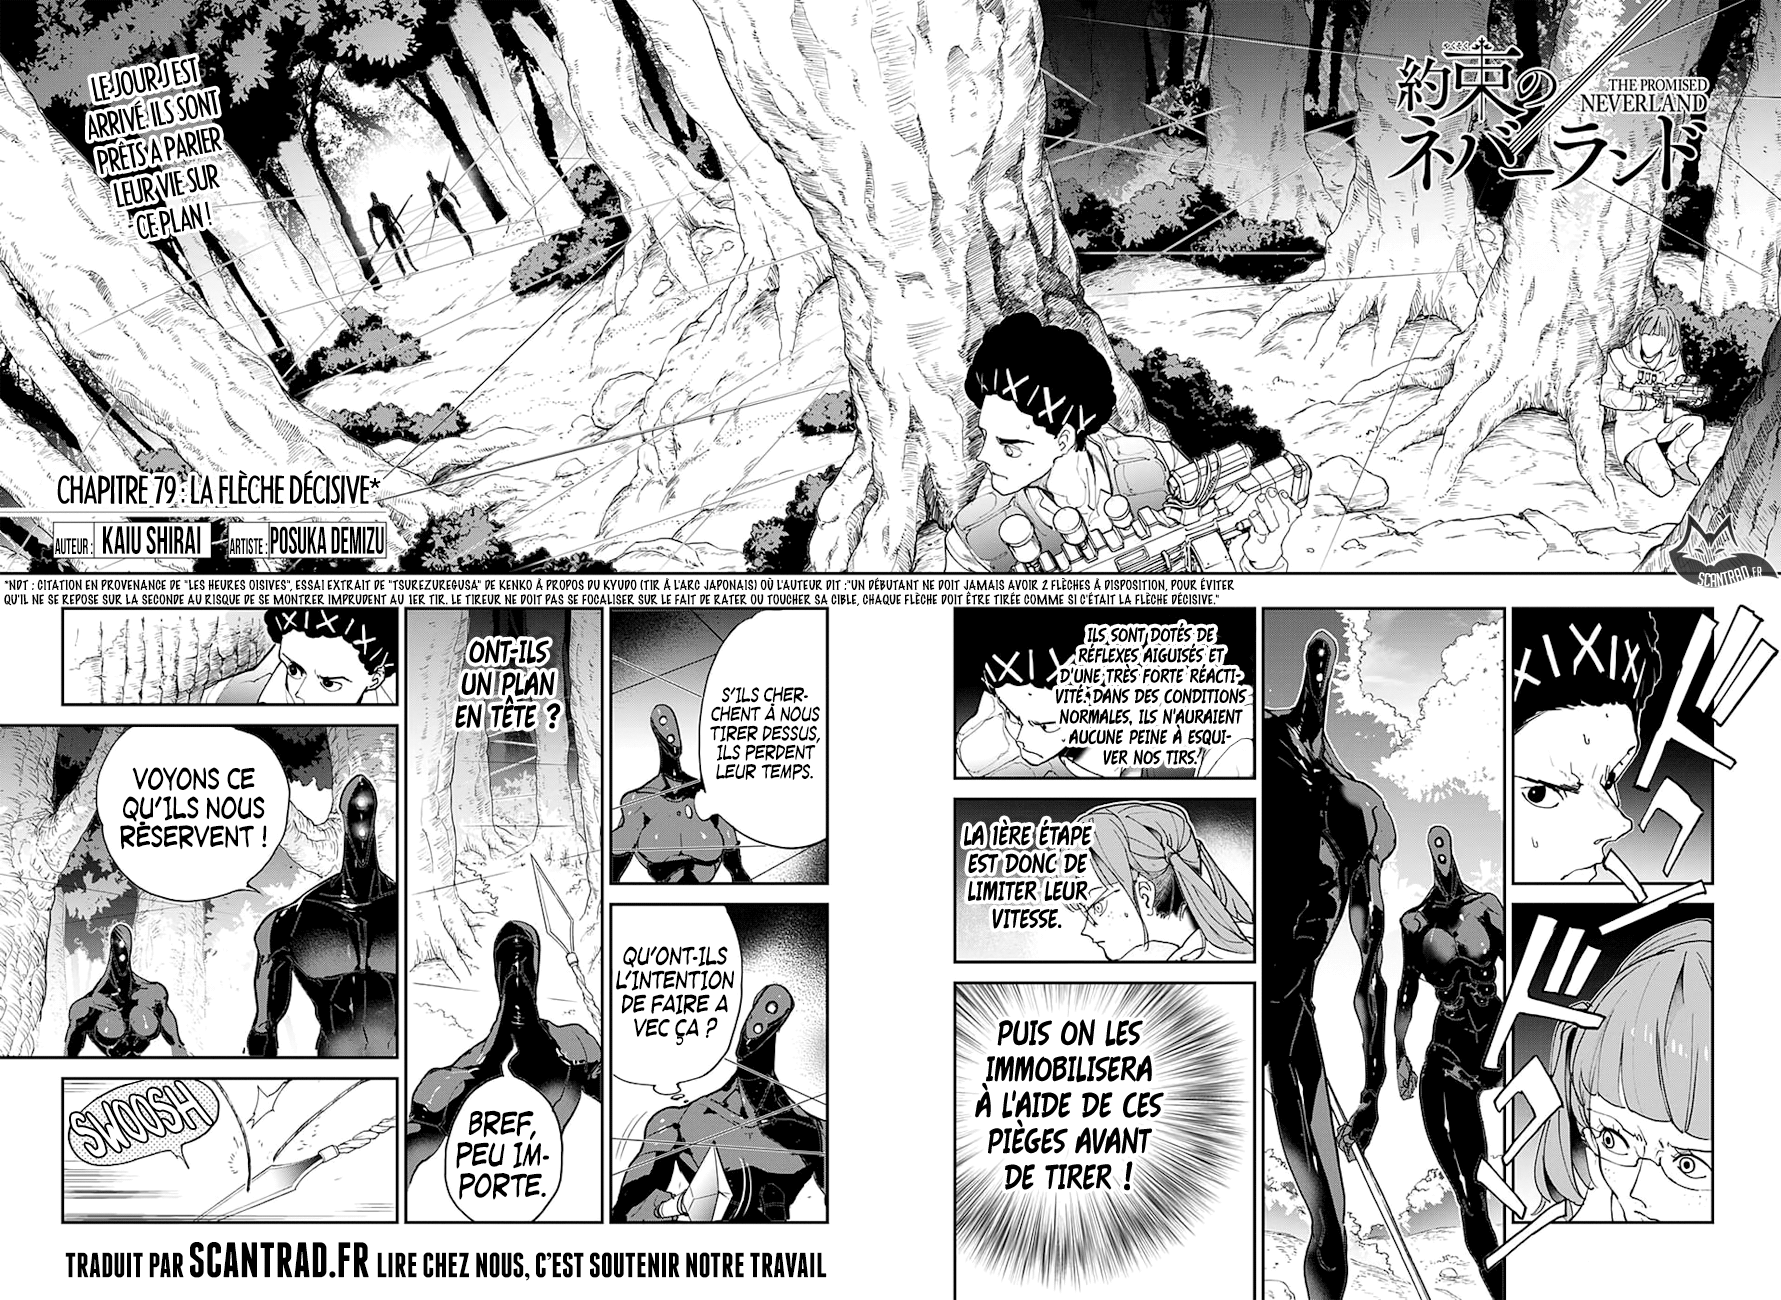 The Promised Neverland: Chapter chapitre-79 - Page 2